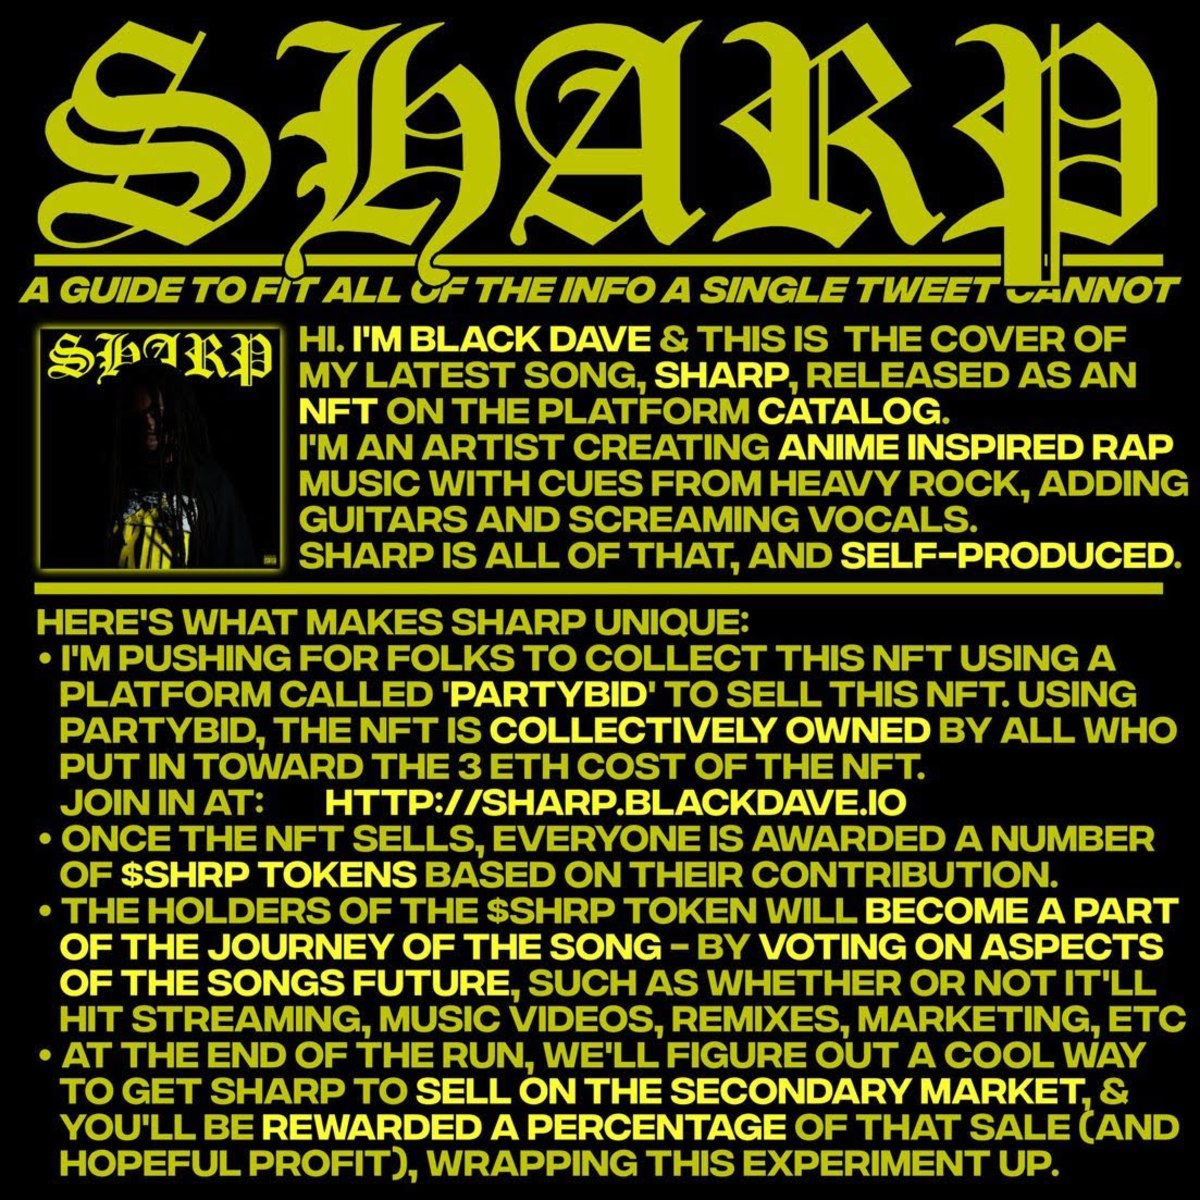 COVER ART FOR BLACK DAVE’S “SHARP” RELEASE. CREDIT: BLACK DAVE